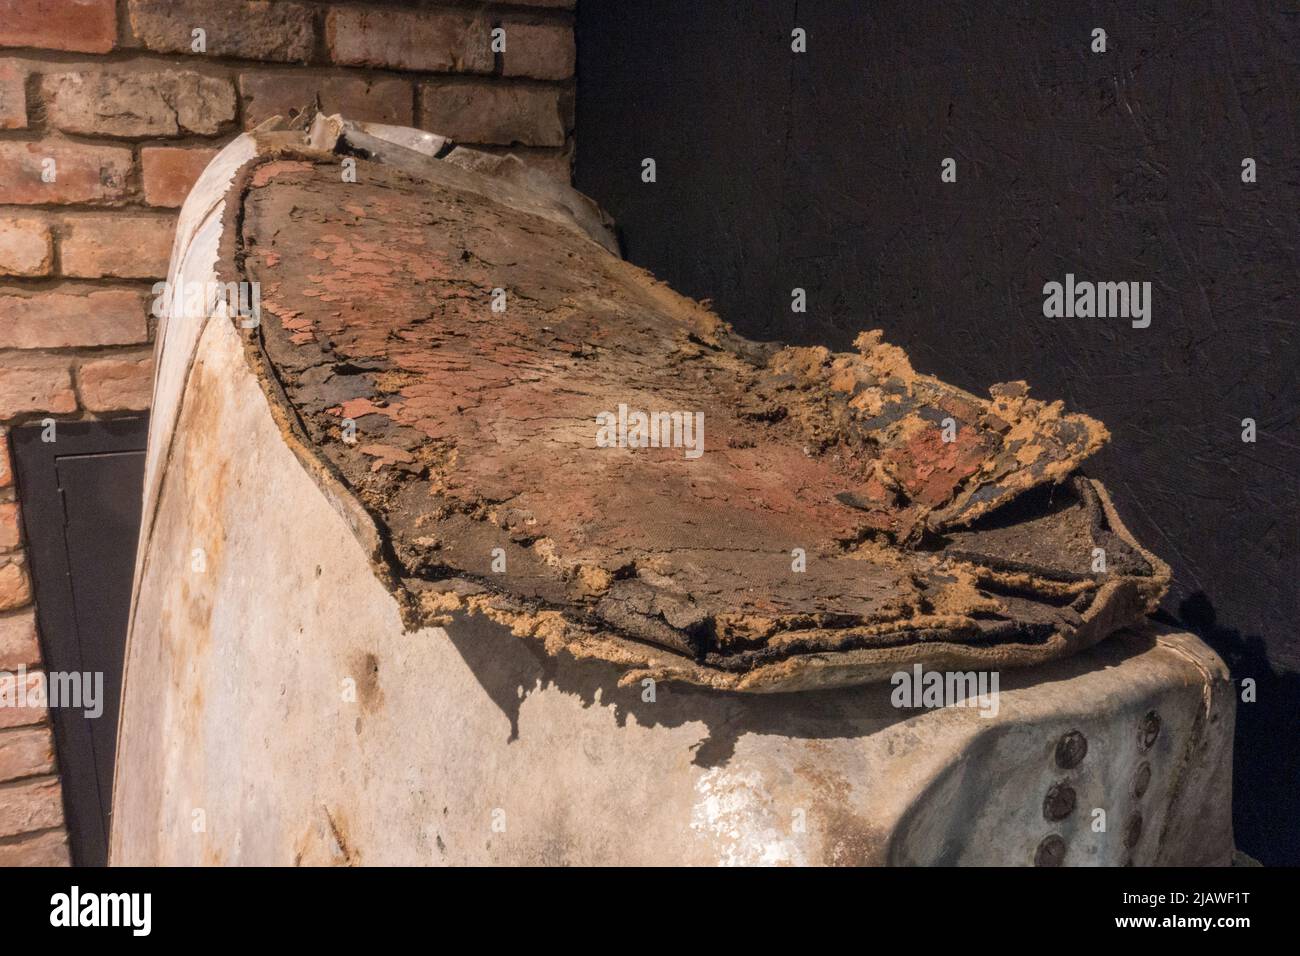 Remains of a self-sealing aircraft fuel tank (Lancaster II or Halifax bomber),  Eden Camp Modern History Theme Museum, North Yorkshire, England. Stock Photo